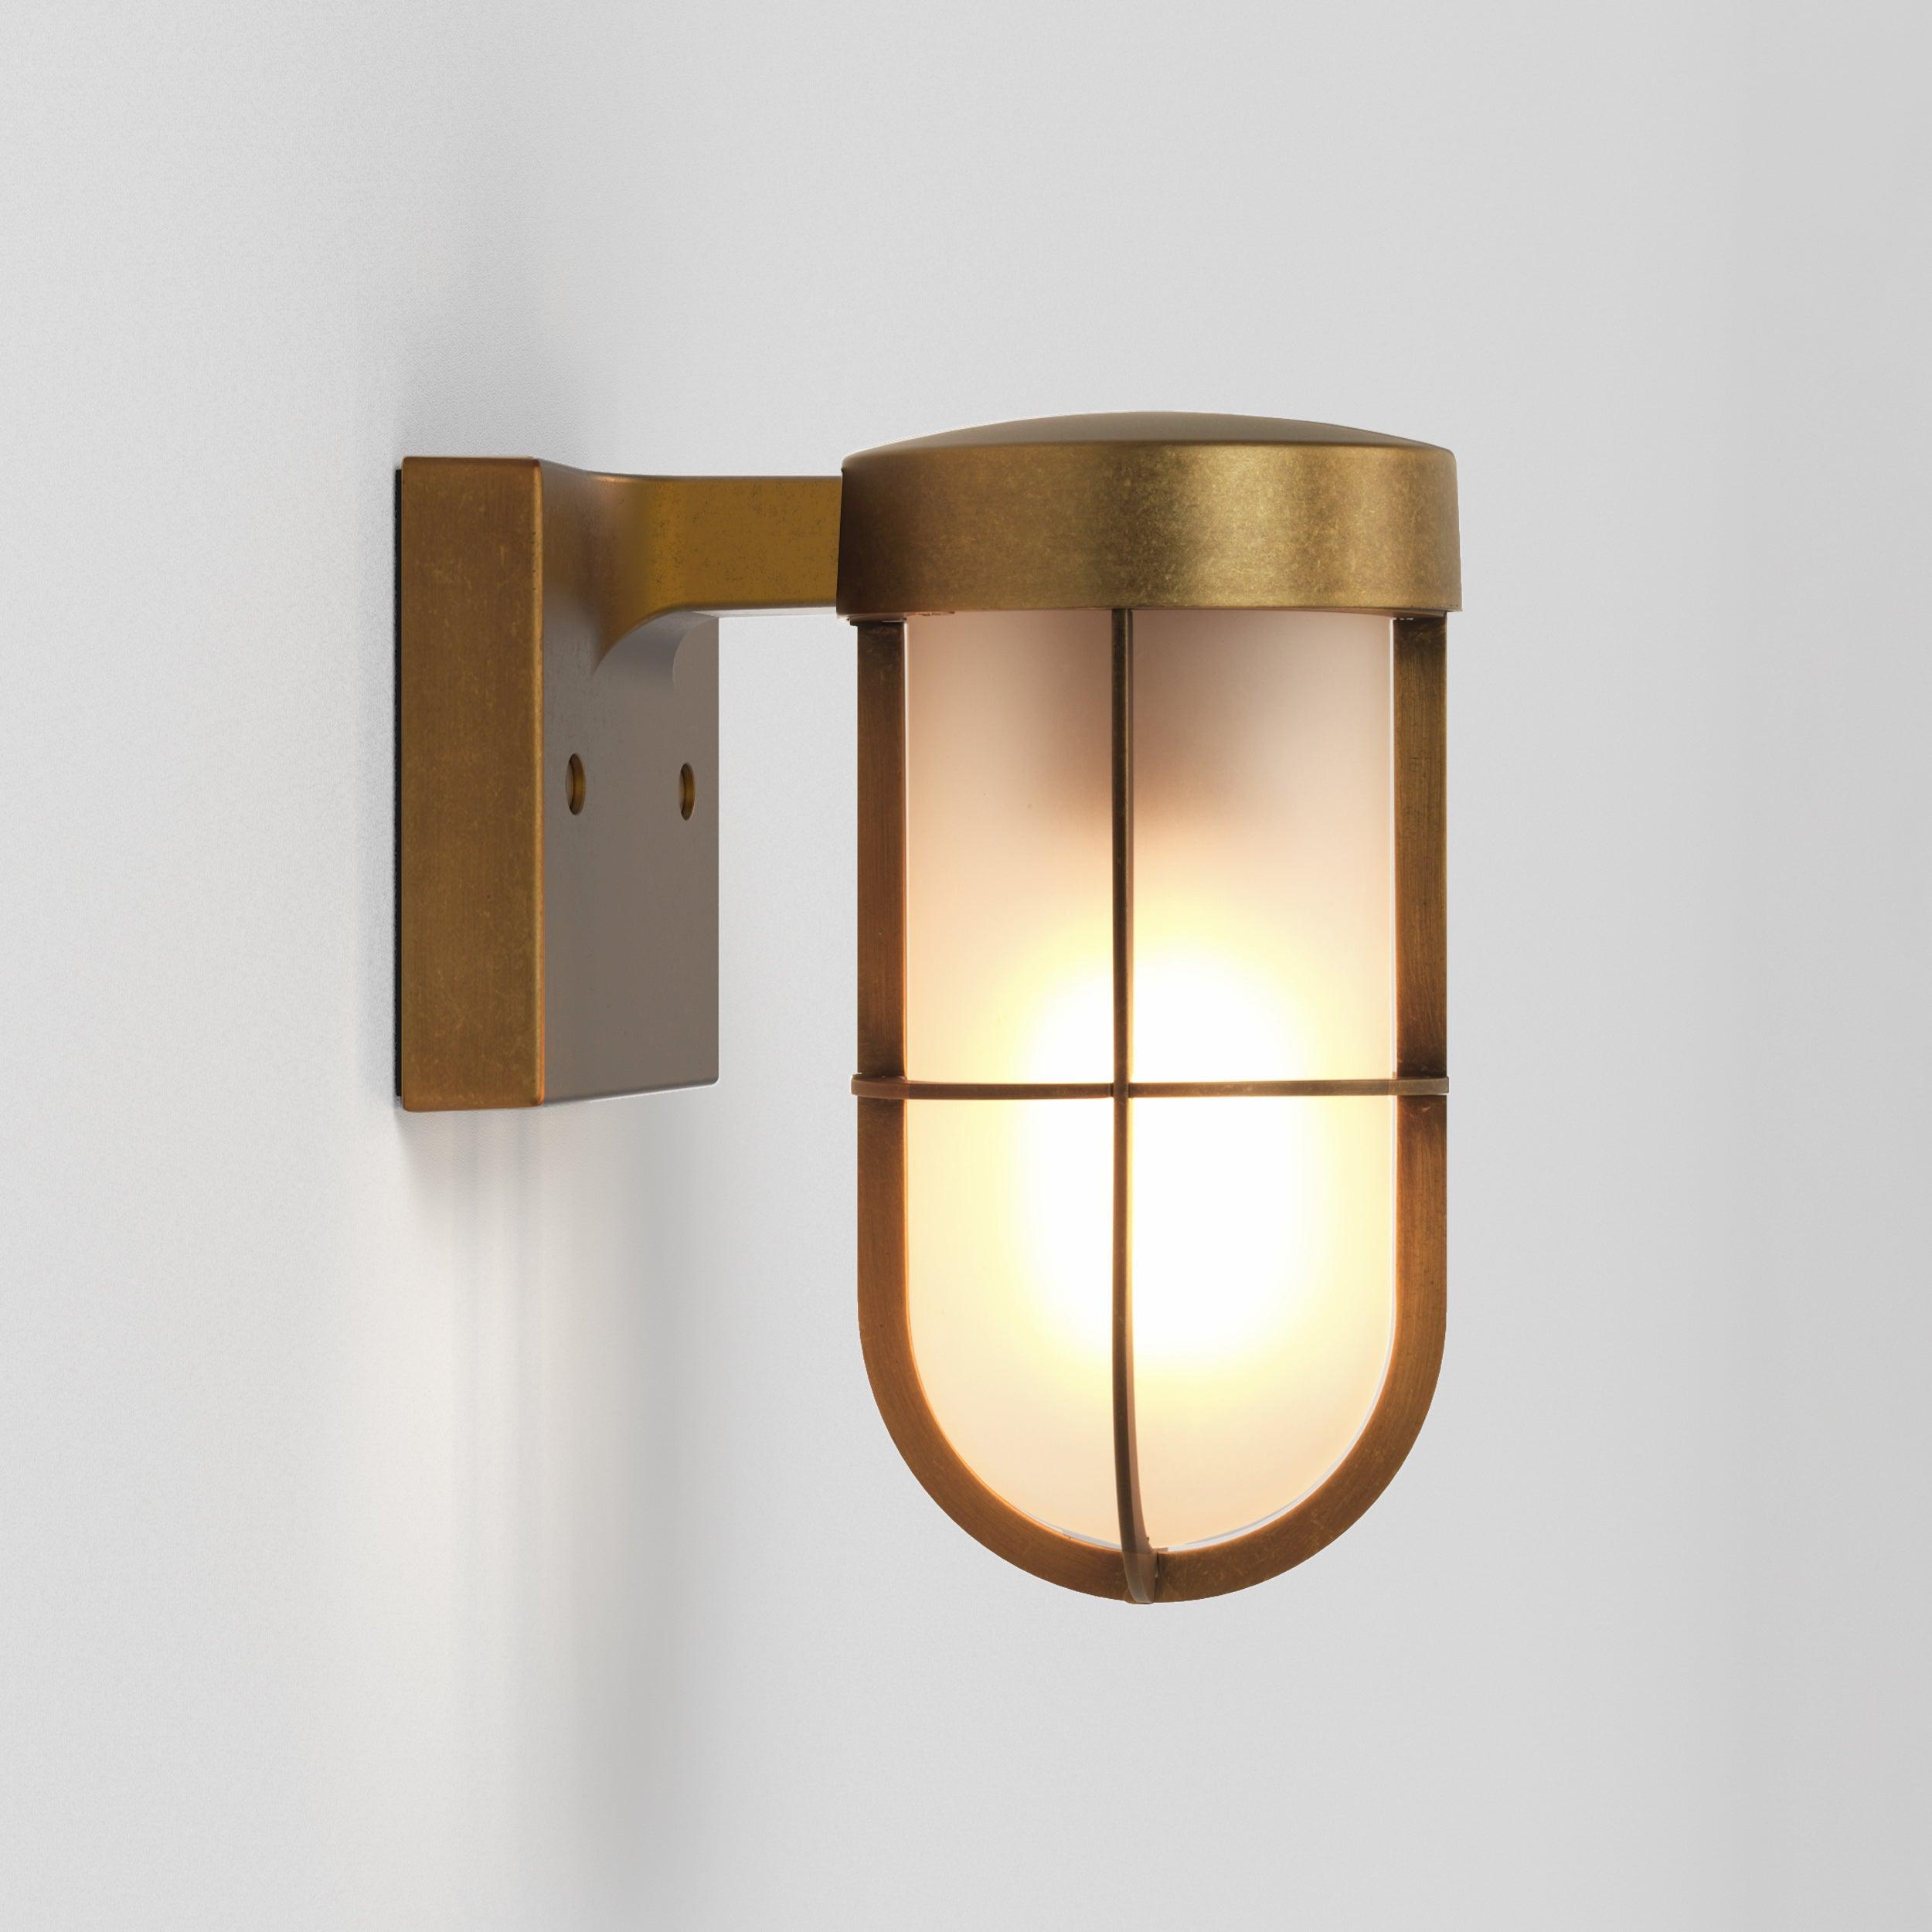 Astro Lighting - Cabin Frosted Wall Light - 1368016 | Montreal Lighting & Hardware